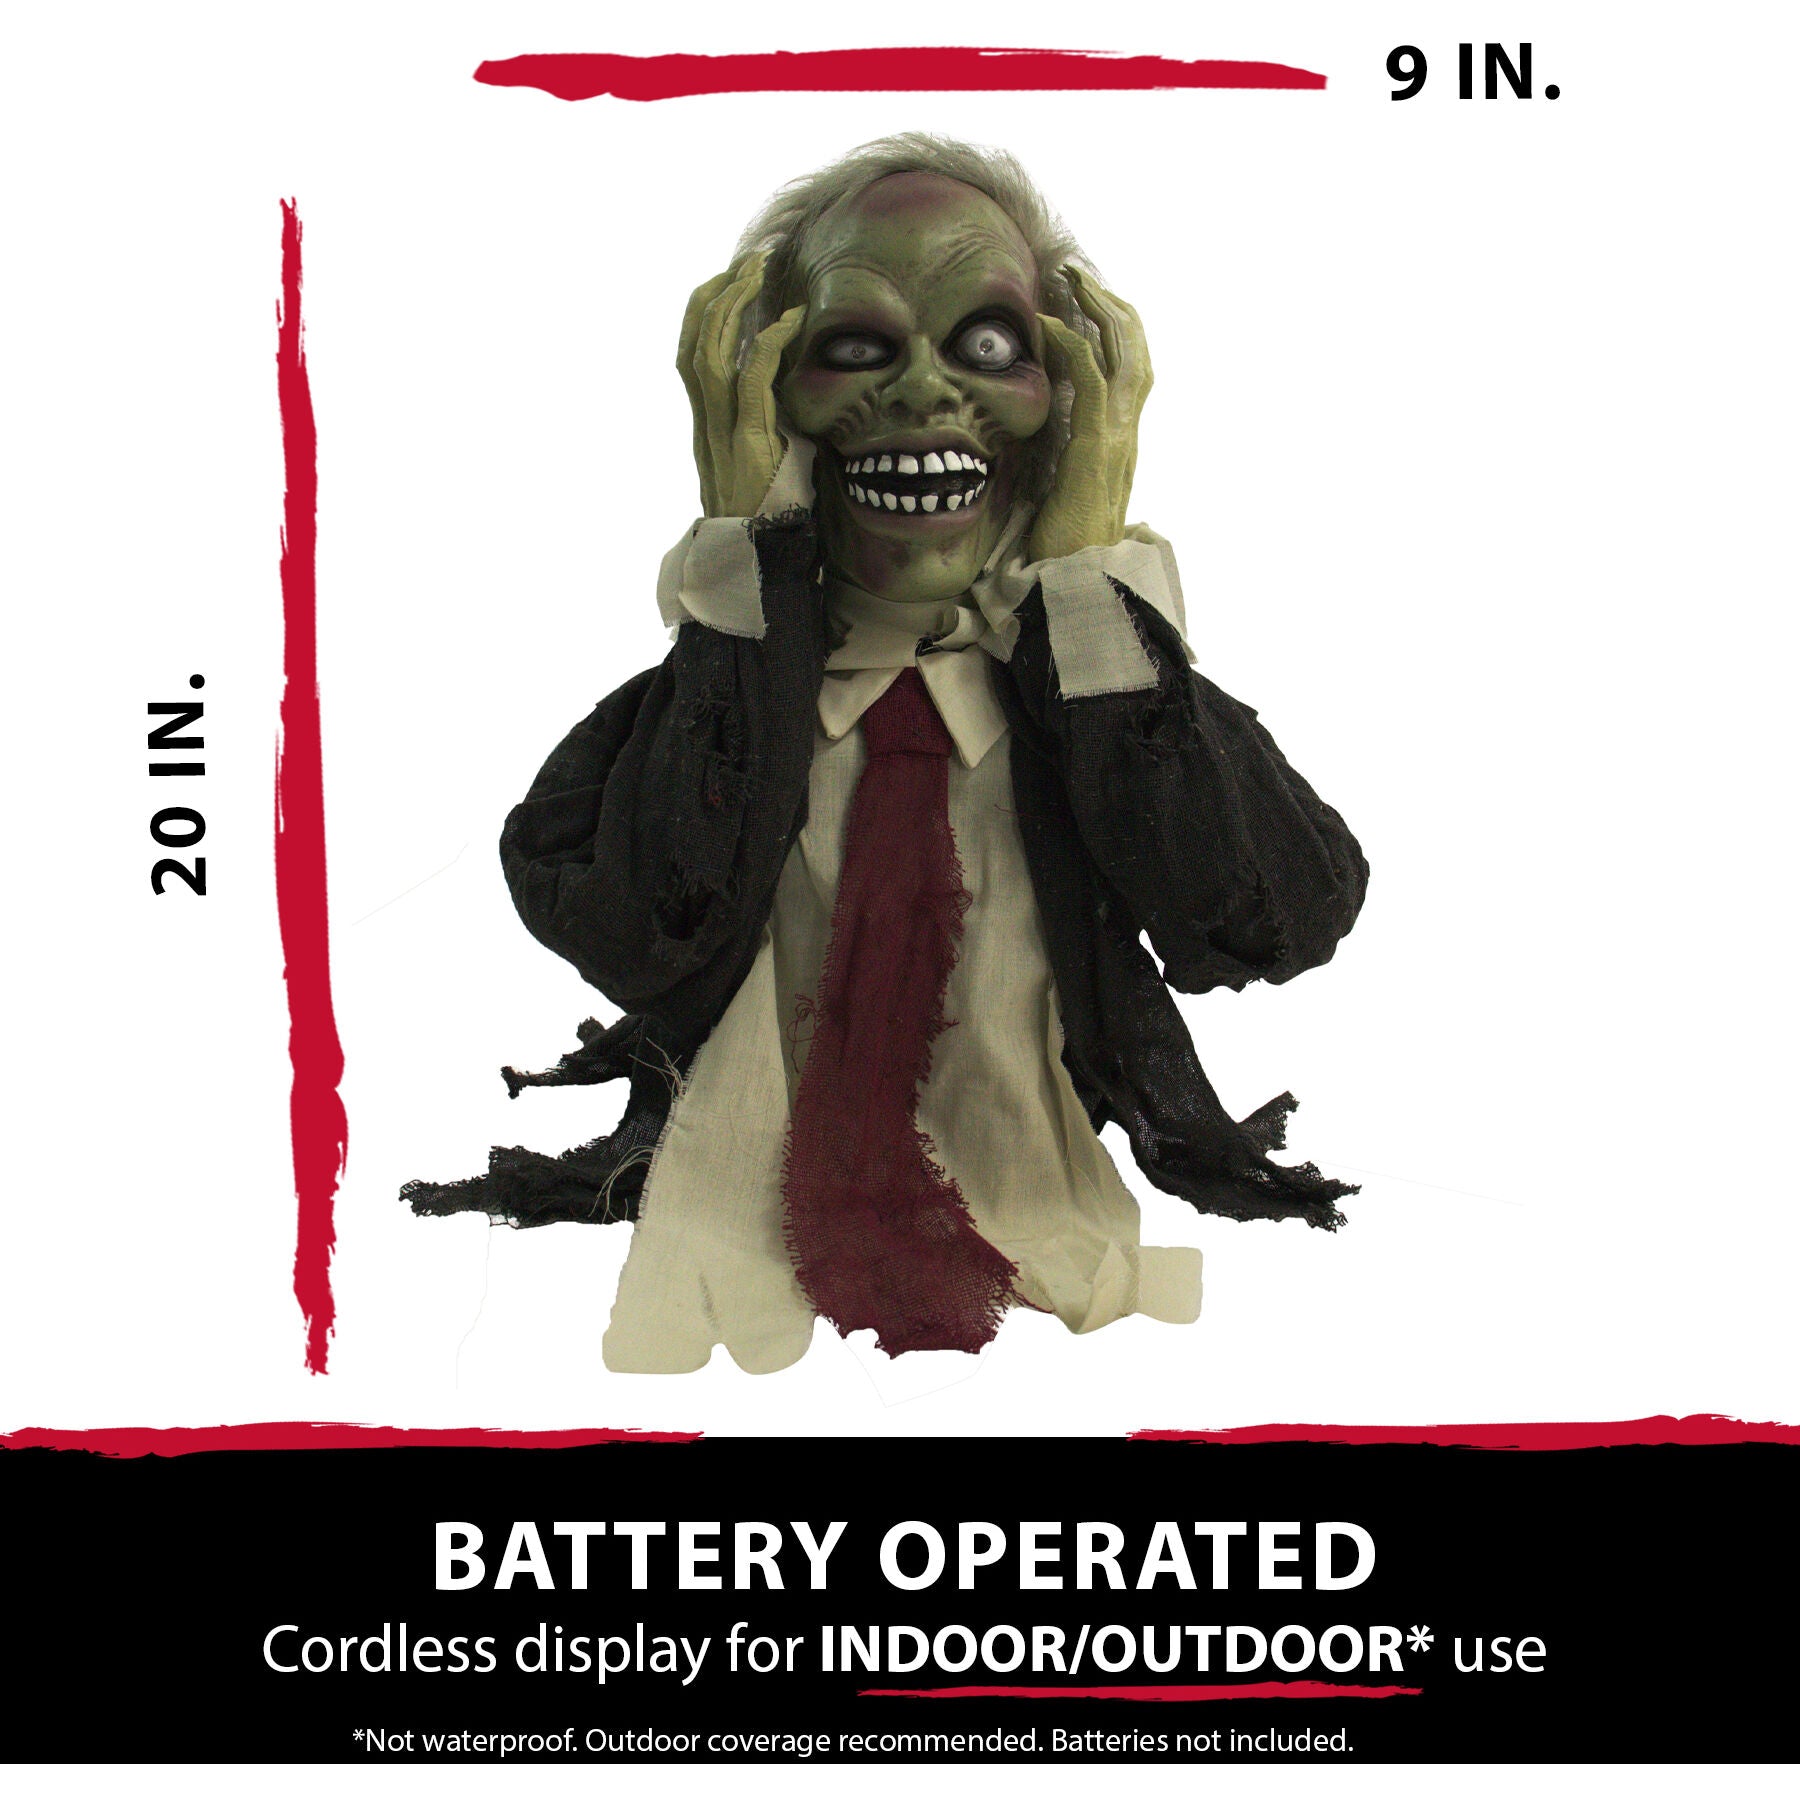 Haunted Hill Farm -  22-In. Draco the Animatronic Pop-Up Ghoul, Indoor or Covered Outdoor Halloween Decoration, Red LED Eyes